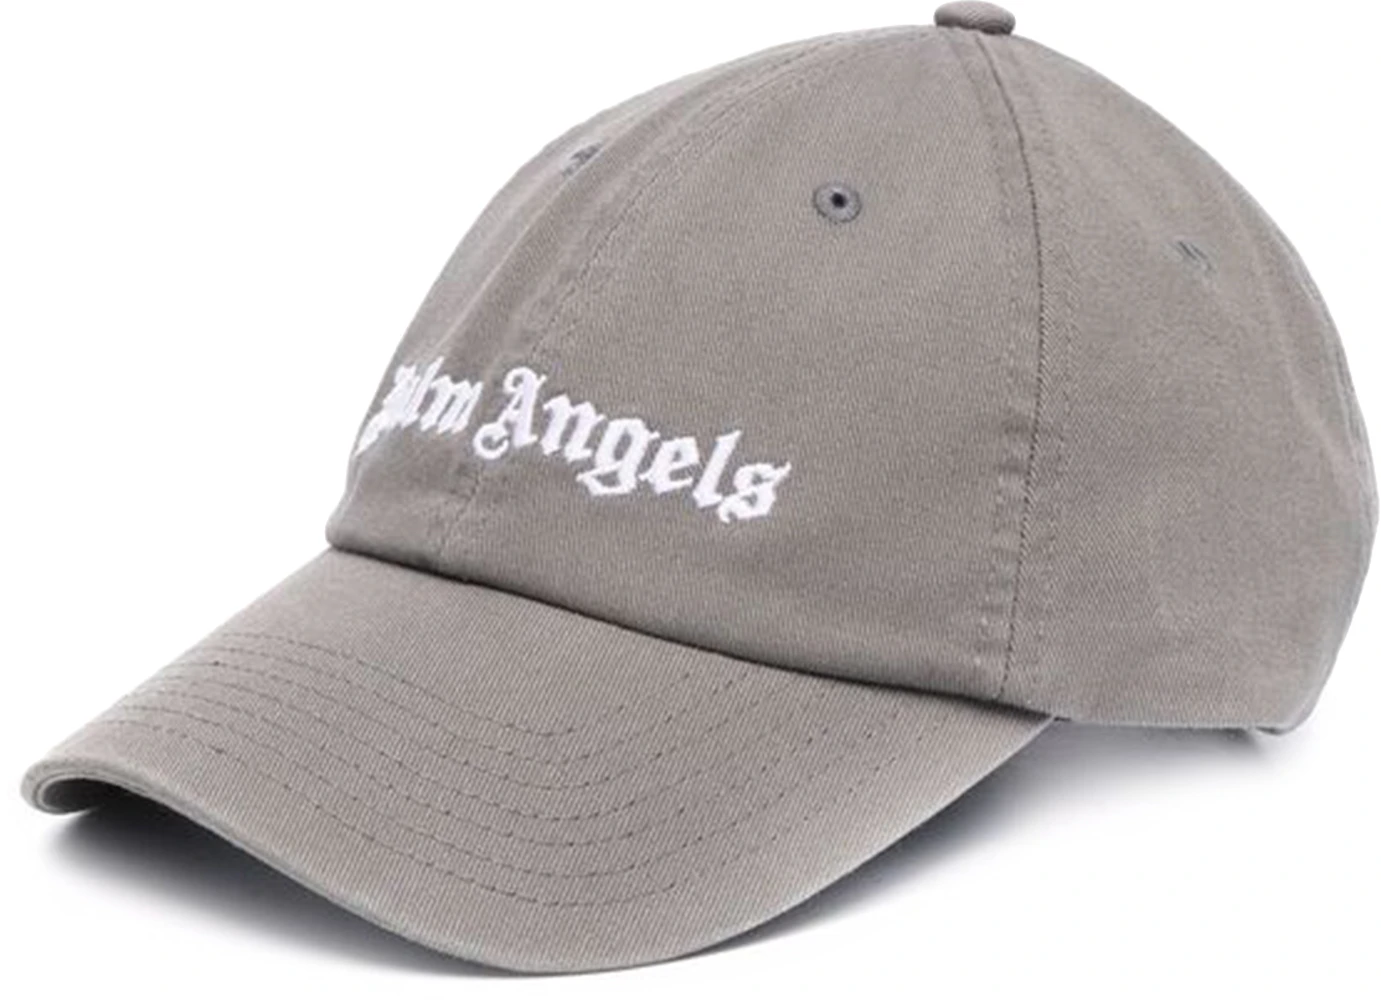 Palm Angels Embroidered Logo Cap Gray White Men's - FW21 - US